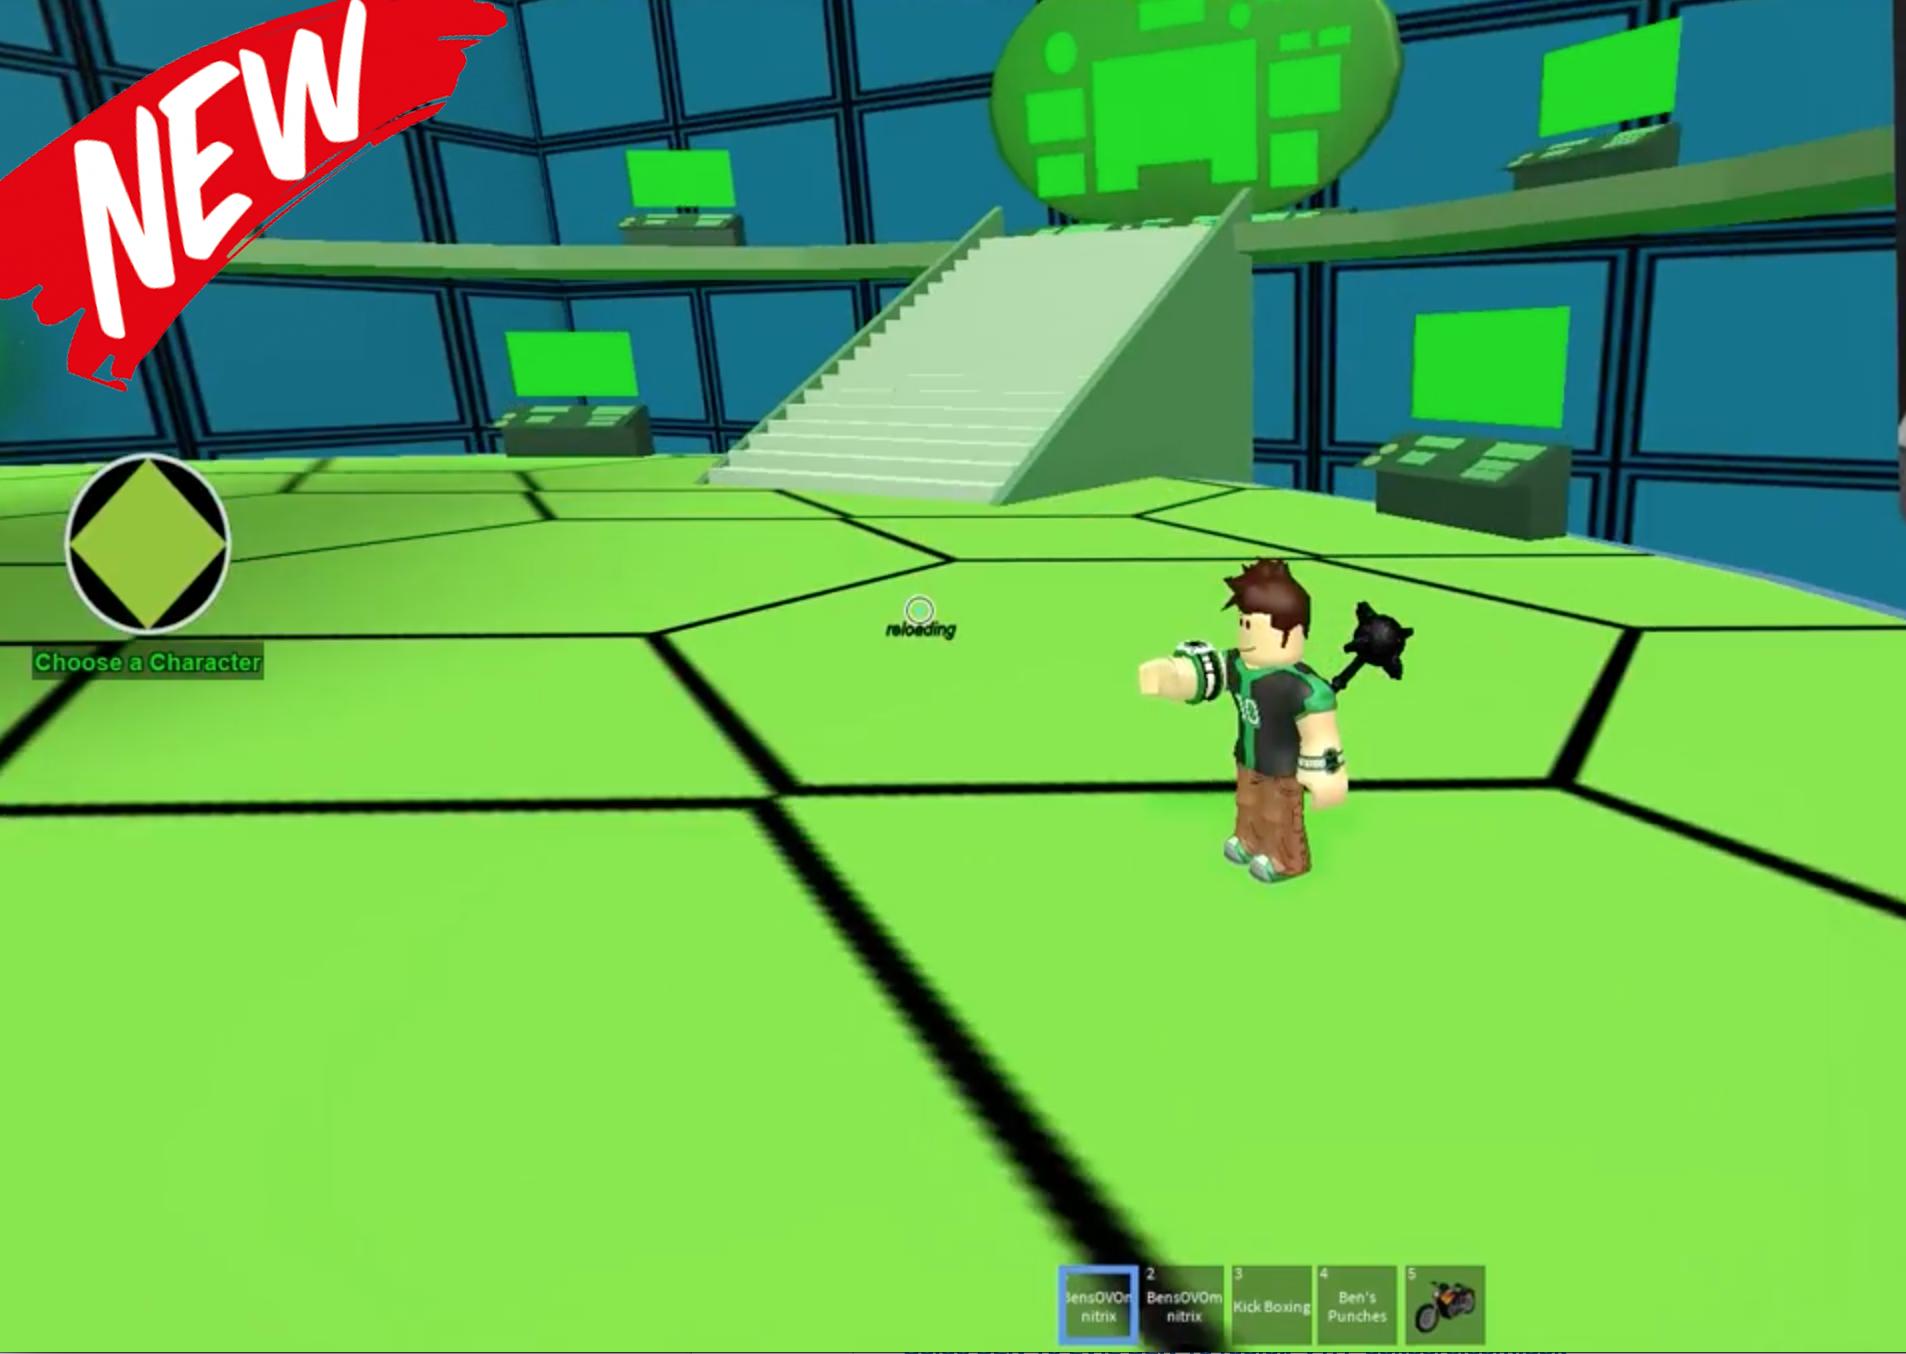 Guide For Ben 10 Evil Ben 10 Roblox Pro For Android Apk Download - app insights ultimate ben 10 evil ben 10 roblox guide